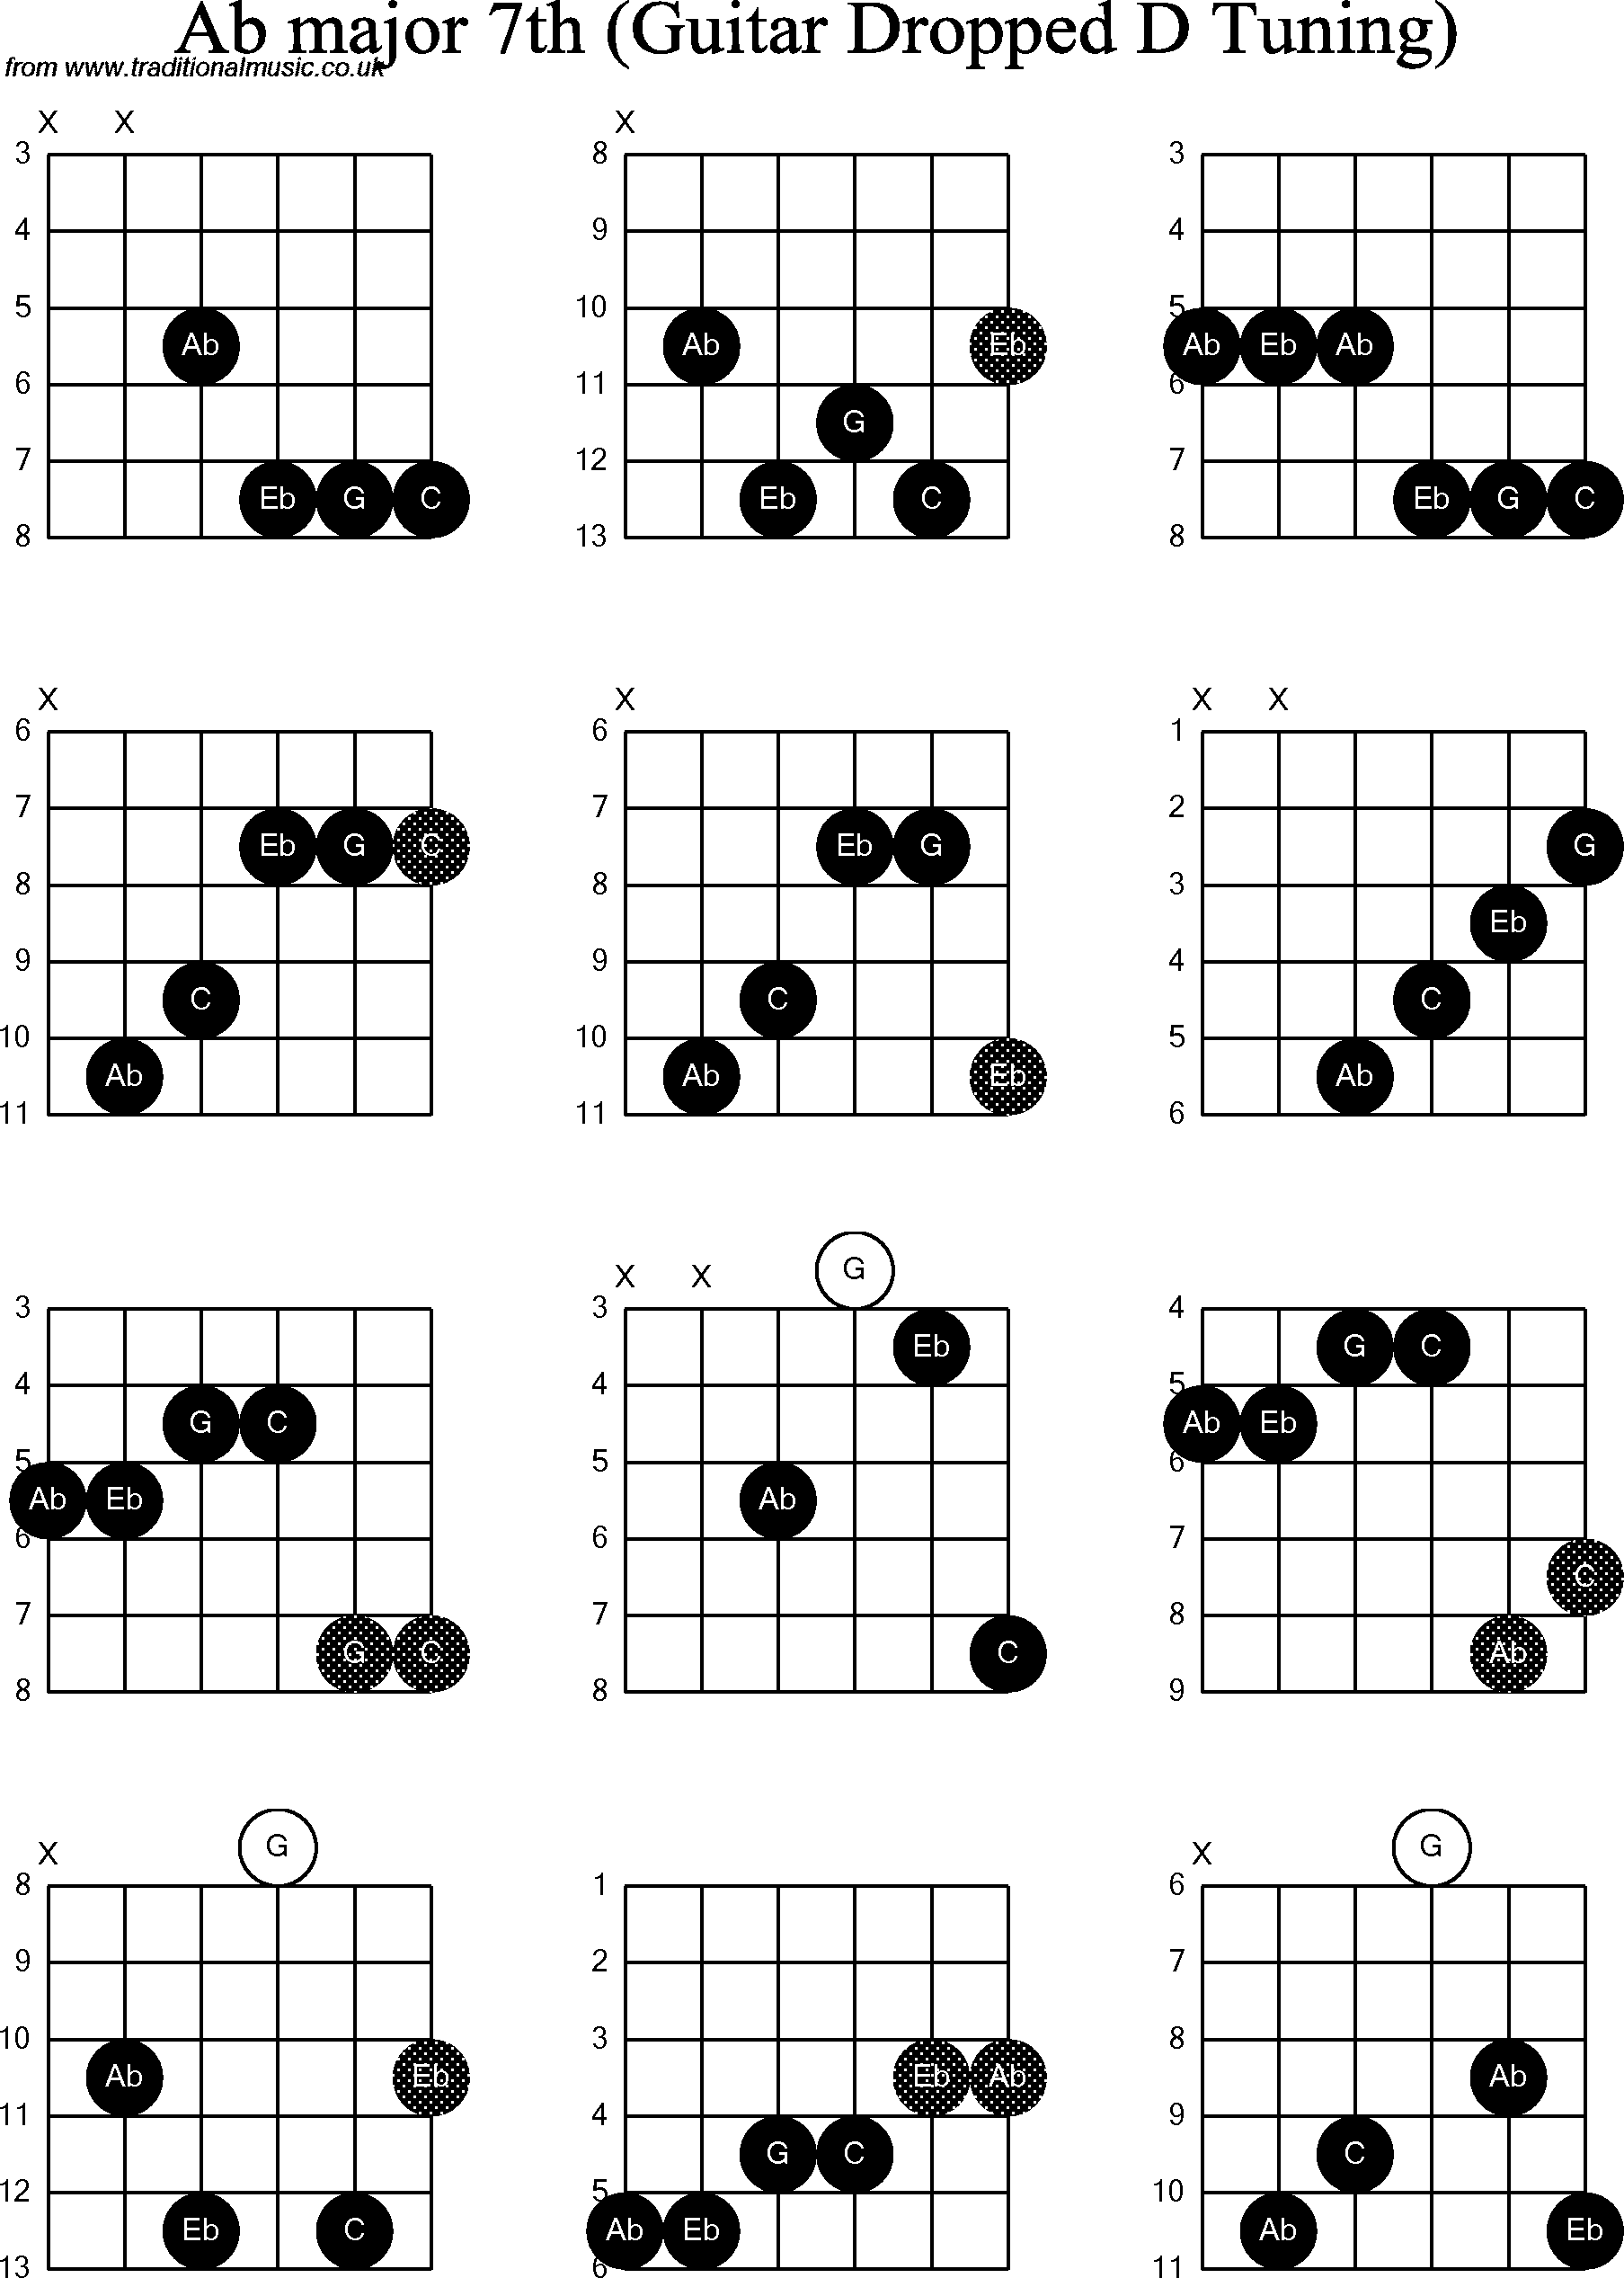 Chord diagrams for dropped D Guitar(DADGBE), Ab Major7th